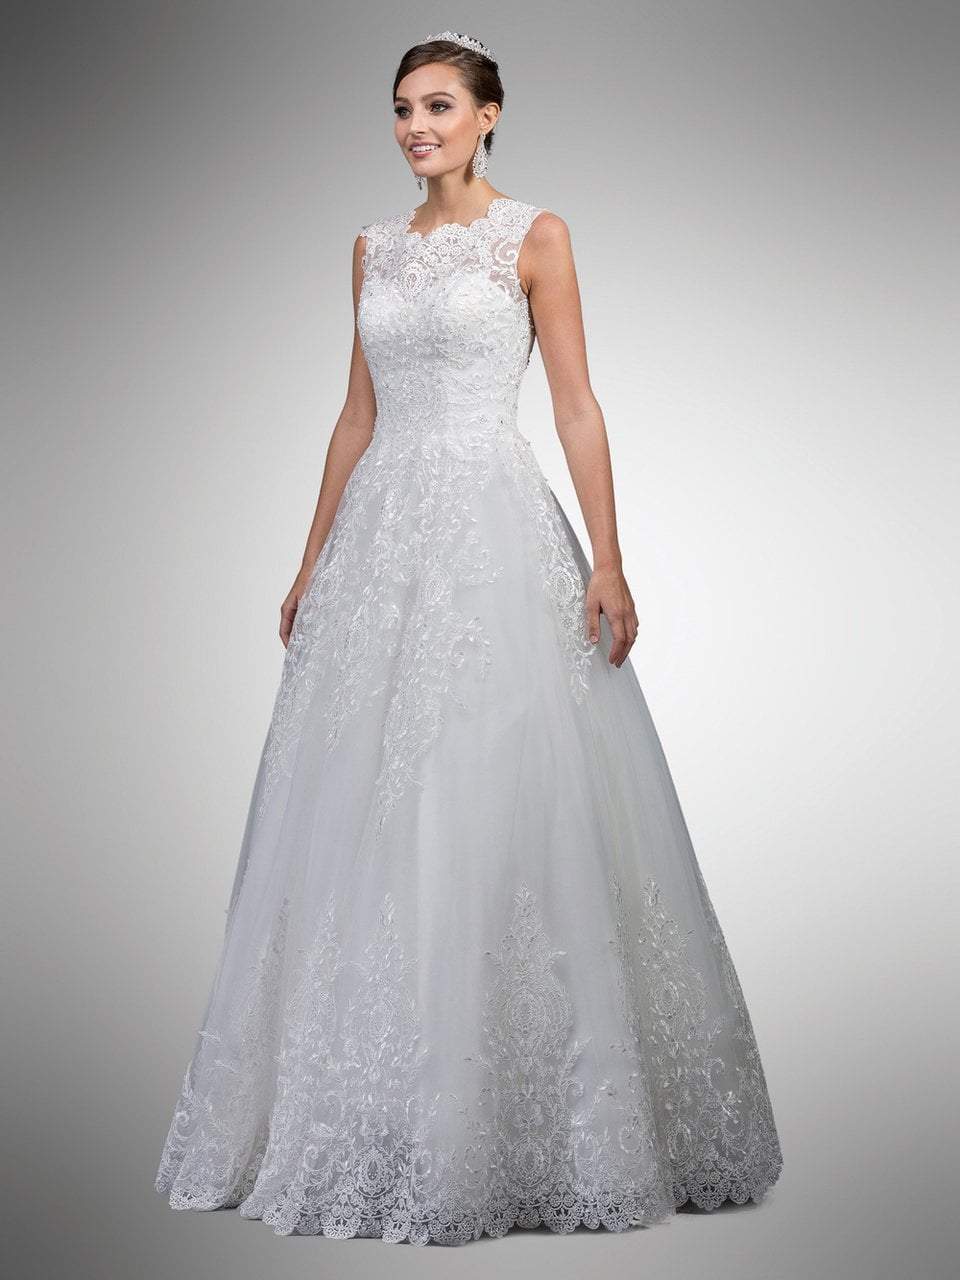 Image of Dancing Queen Bridal - 25 Scalloped Embroidered Lace Corset Ballgown